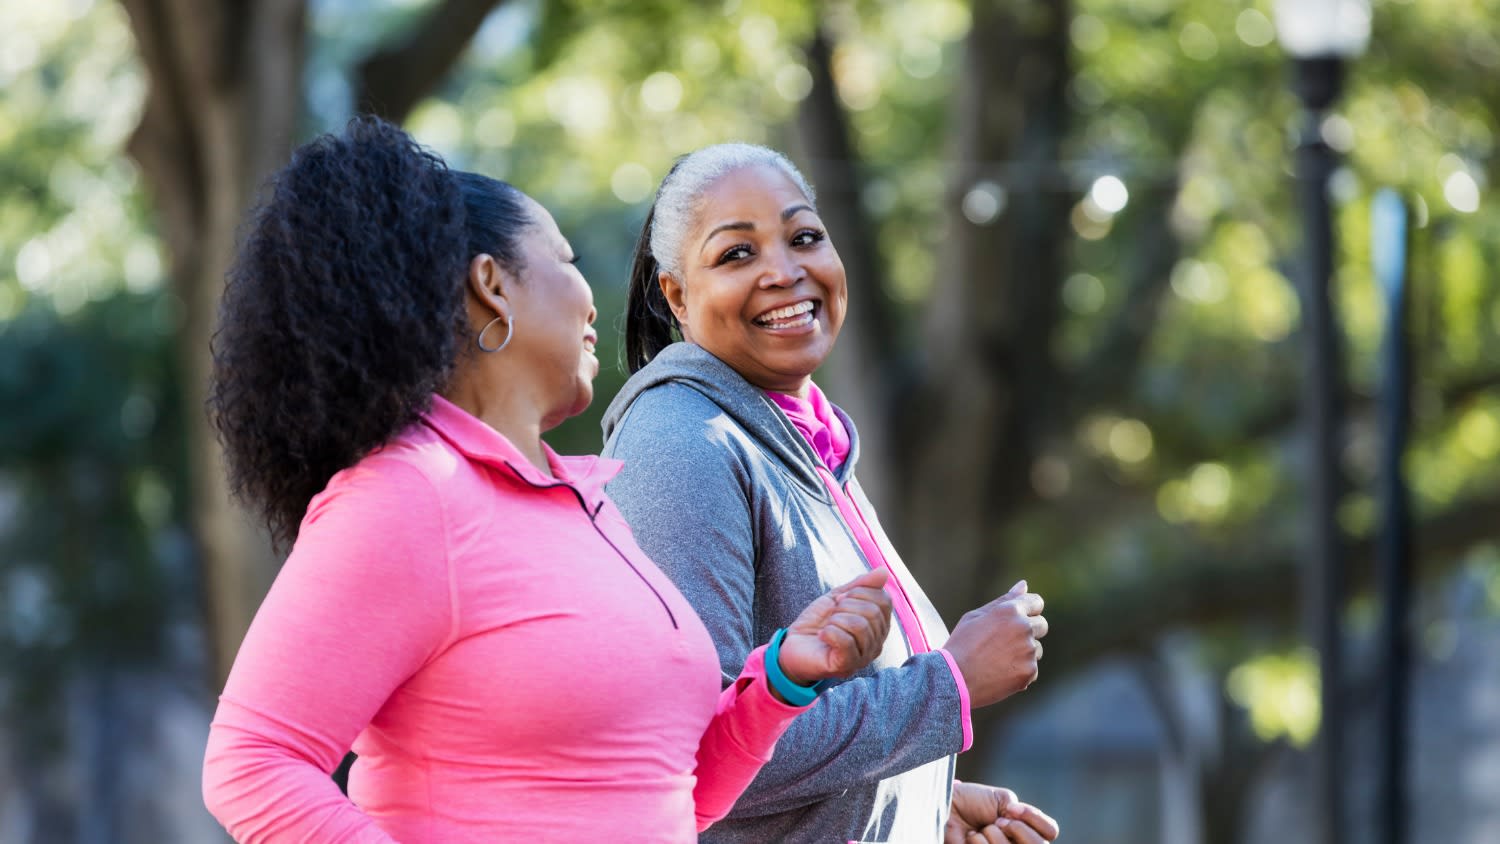 The #1 Exercise You Need to Increase Fitness in Your 60s and Beyond